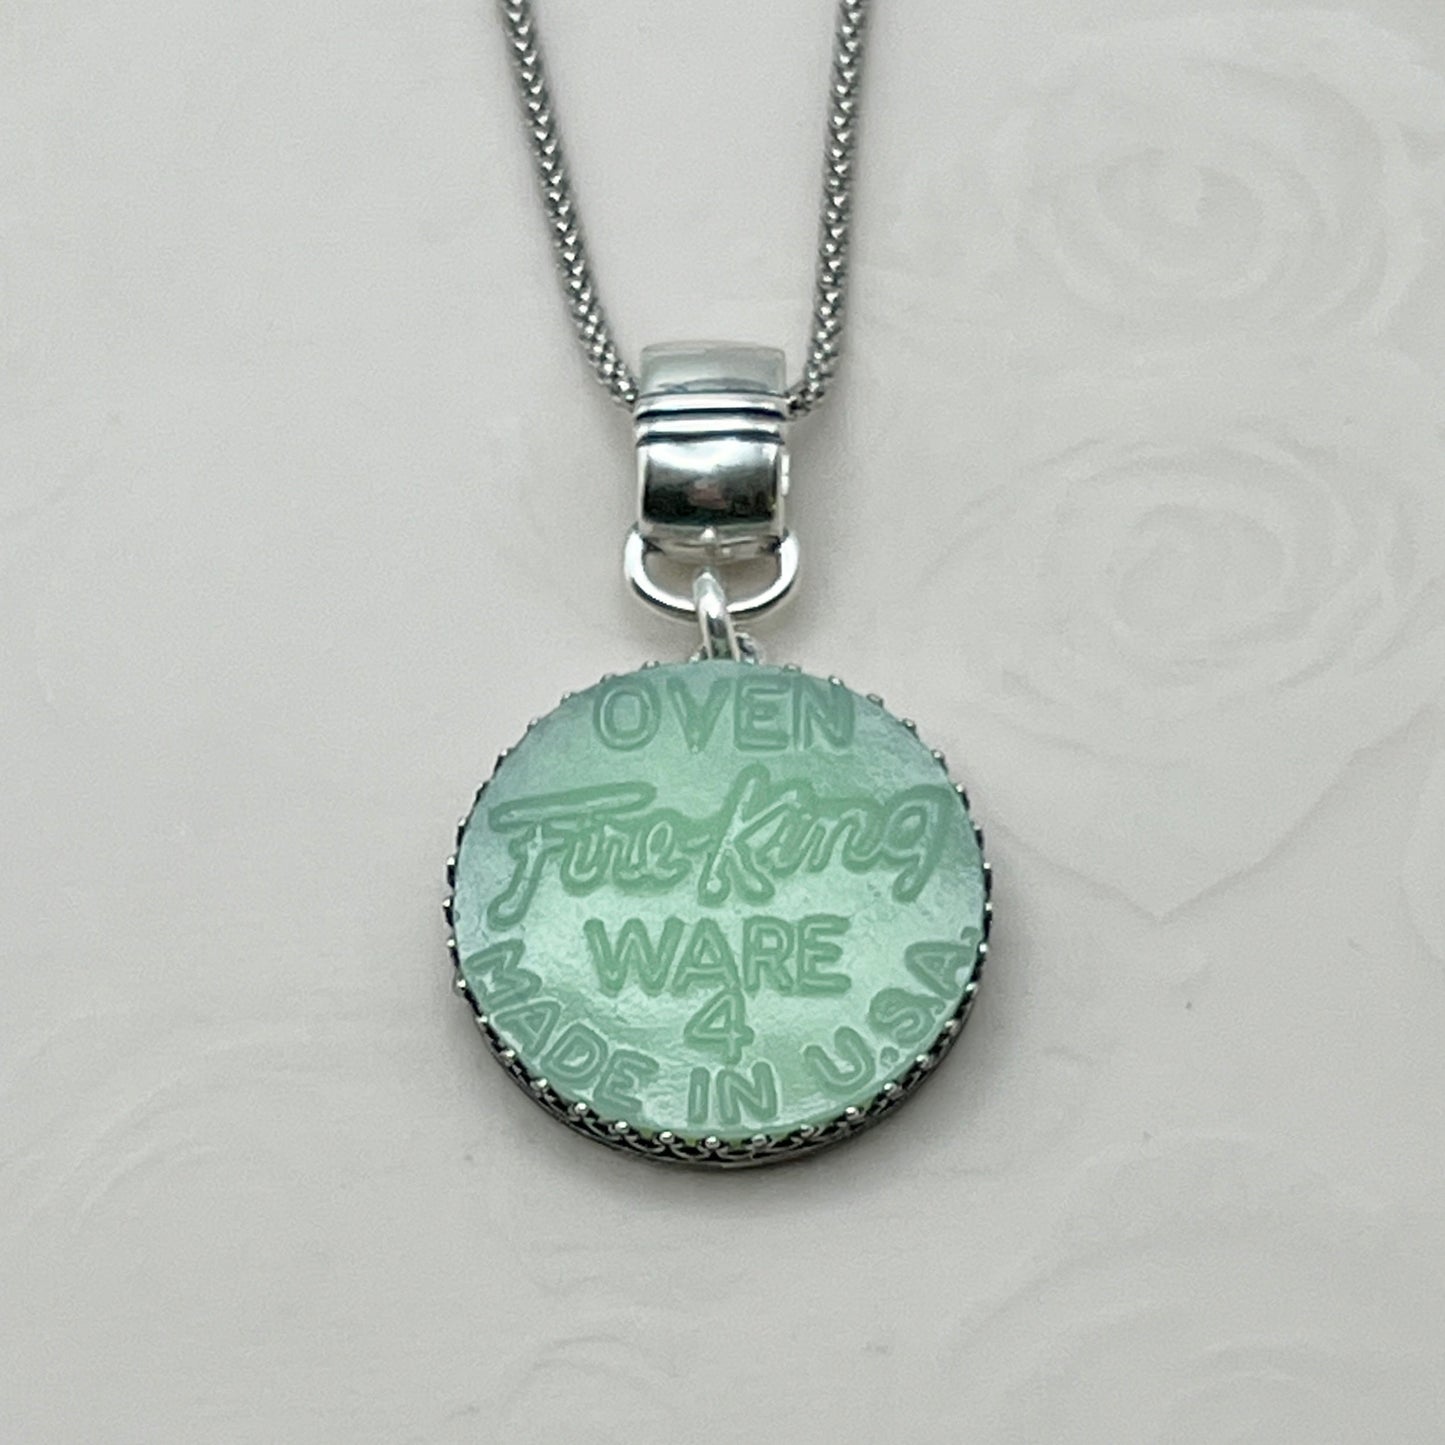 Jadeite Fire King Jewelry, Jadeite Junkies, Broken China Jewelry, Gifts for Mom, Vintage Sterling Silver Necklace, Unique Gifts for Women